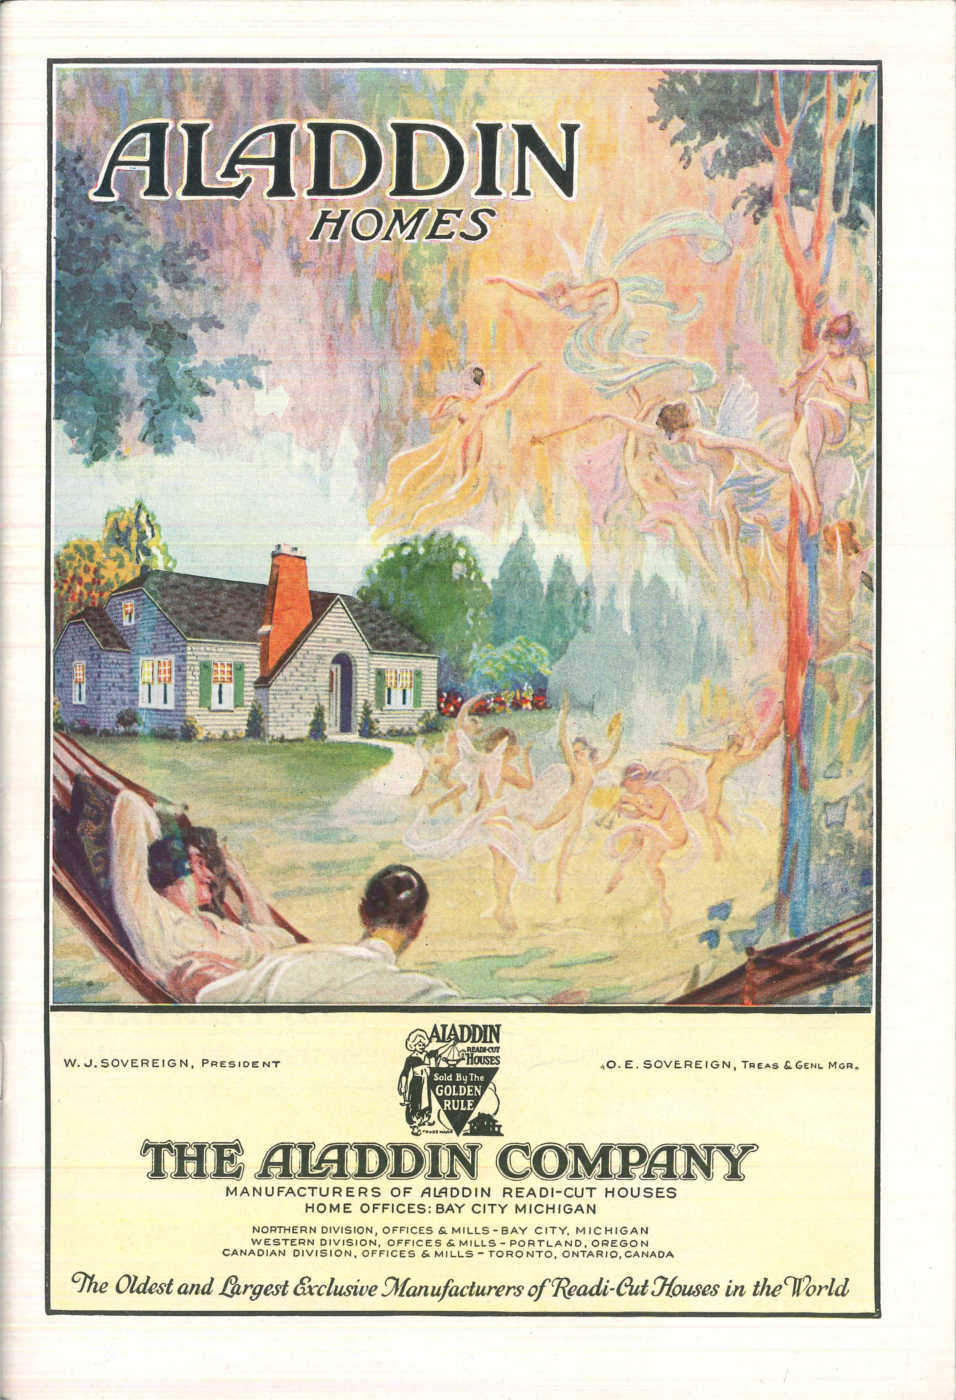 An Aladdin Company Catalog c. 1931. Image courtesy of the Clarke Historical Library at Central Michigan University.